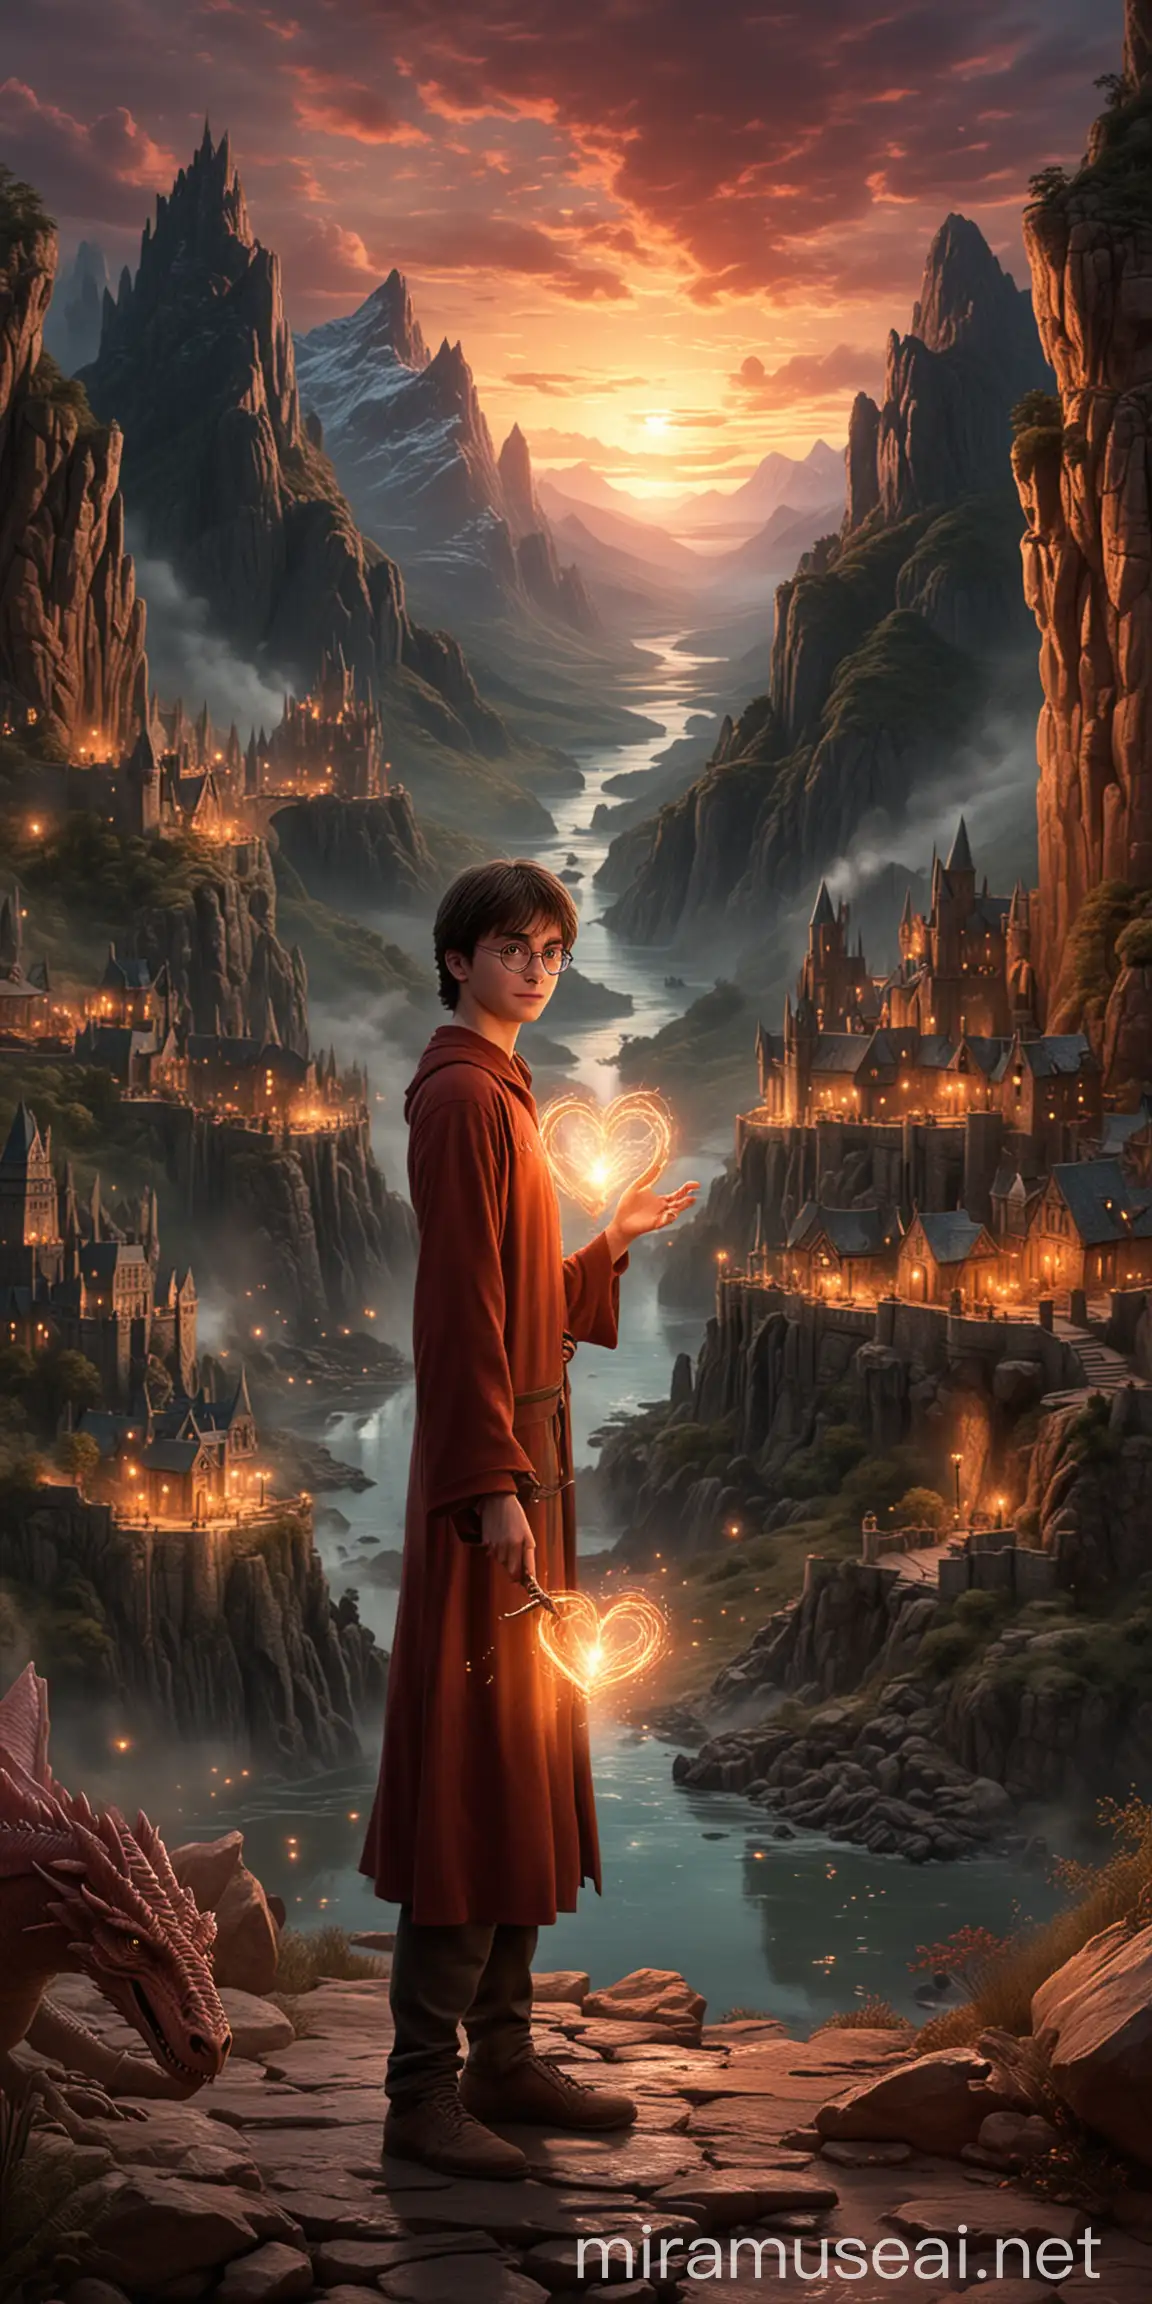 Wizard Holding Glowing Heart in Mythical Realm